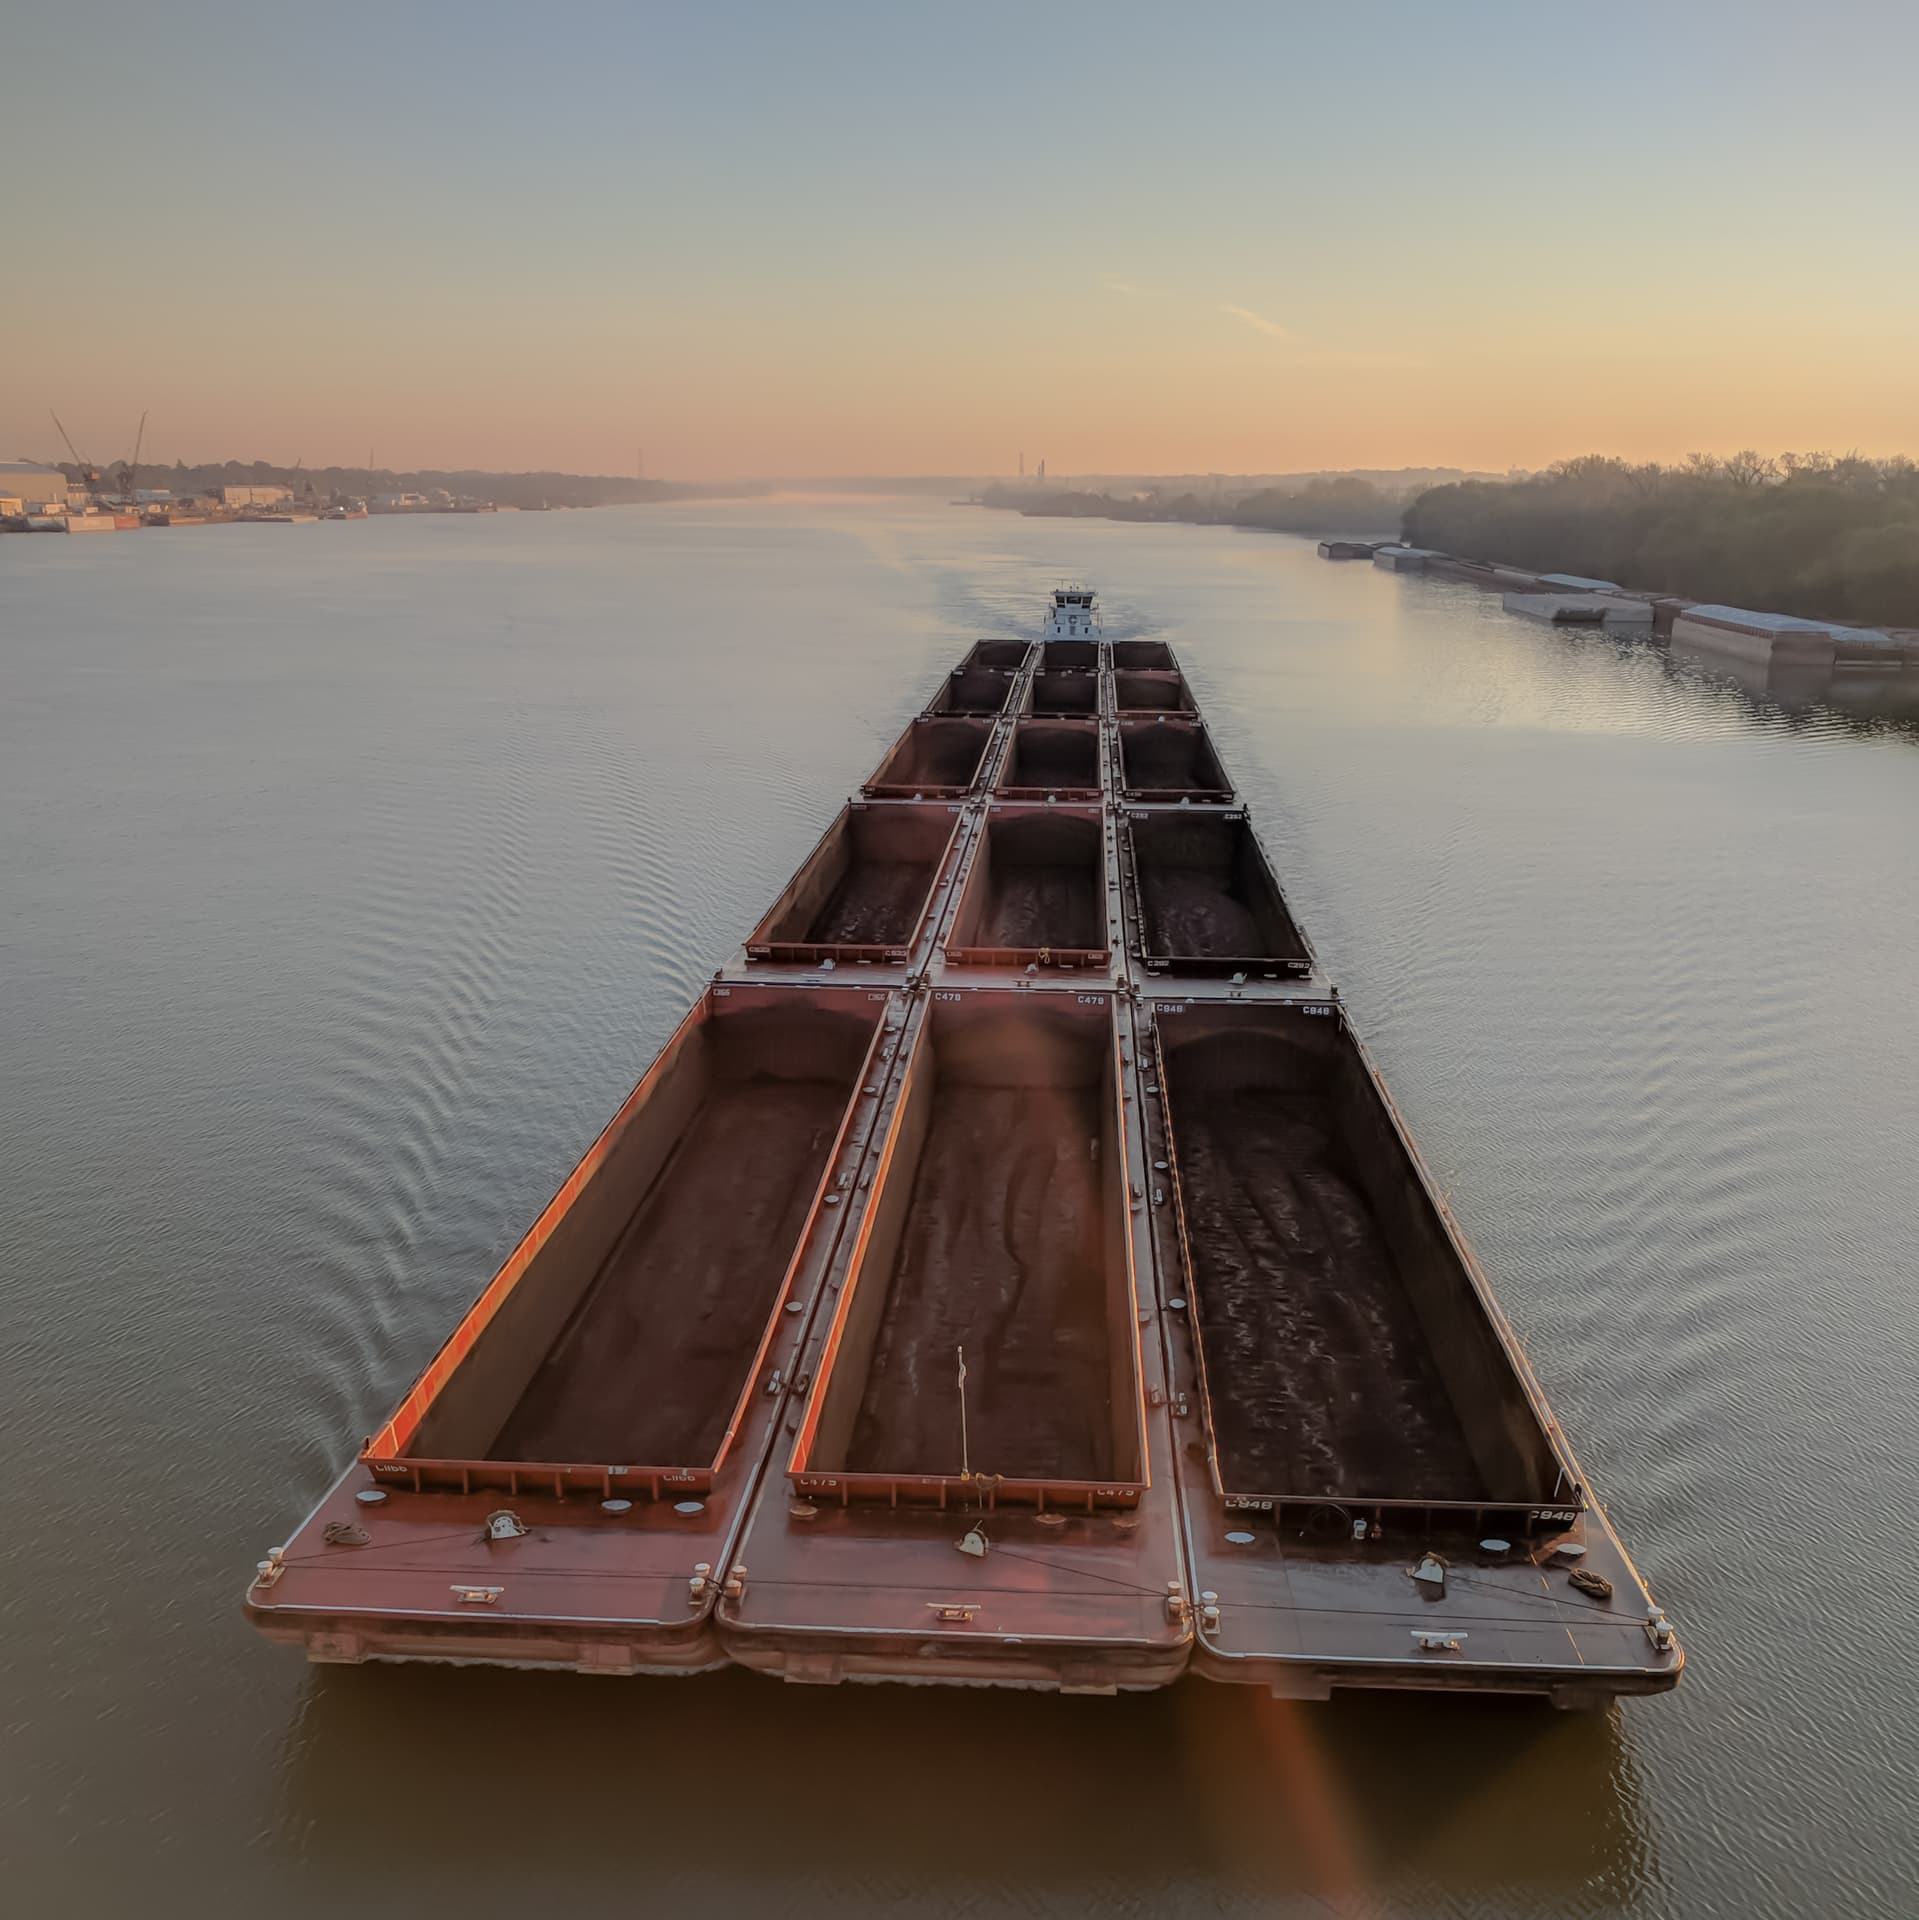 The view directly down towards an empty coal barge traveling west along the Ohio River at dawn.